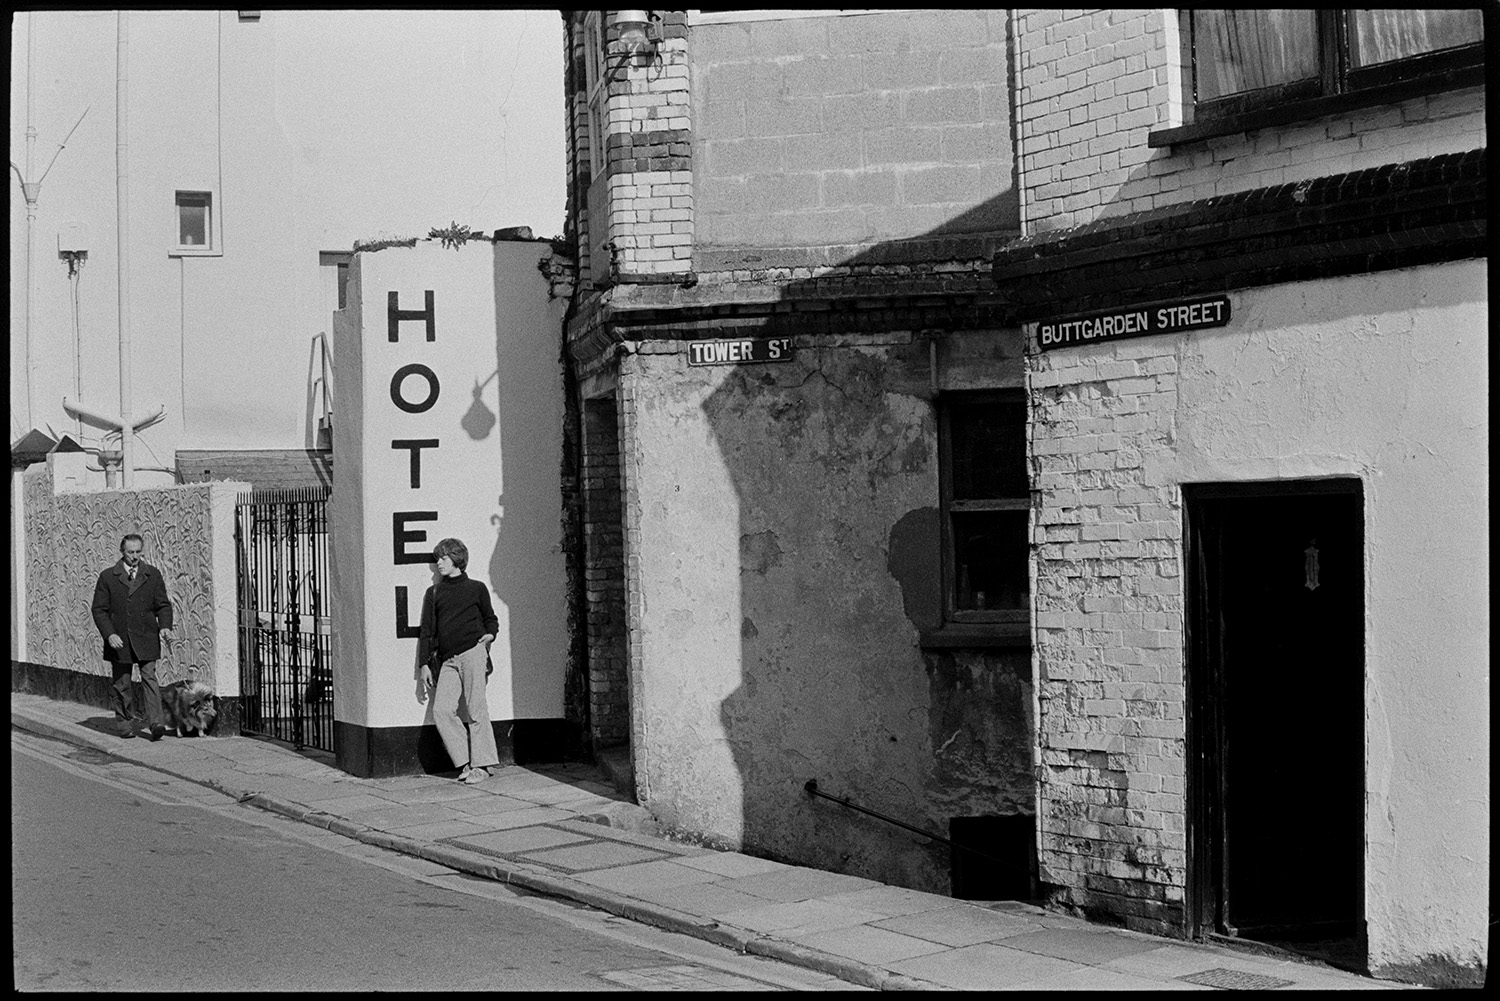 A man walking a dog along Buttgarden Street, Bideford. Another person is leaning against a wall with the word 'Hotel' painted on it.